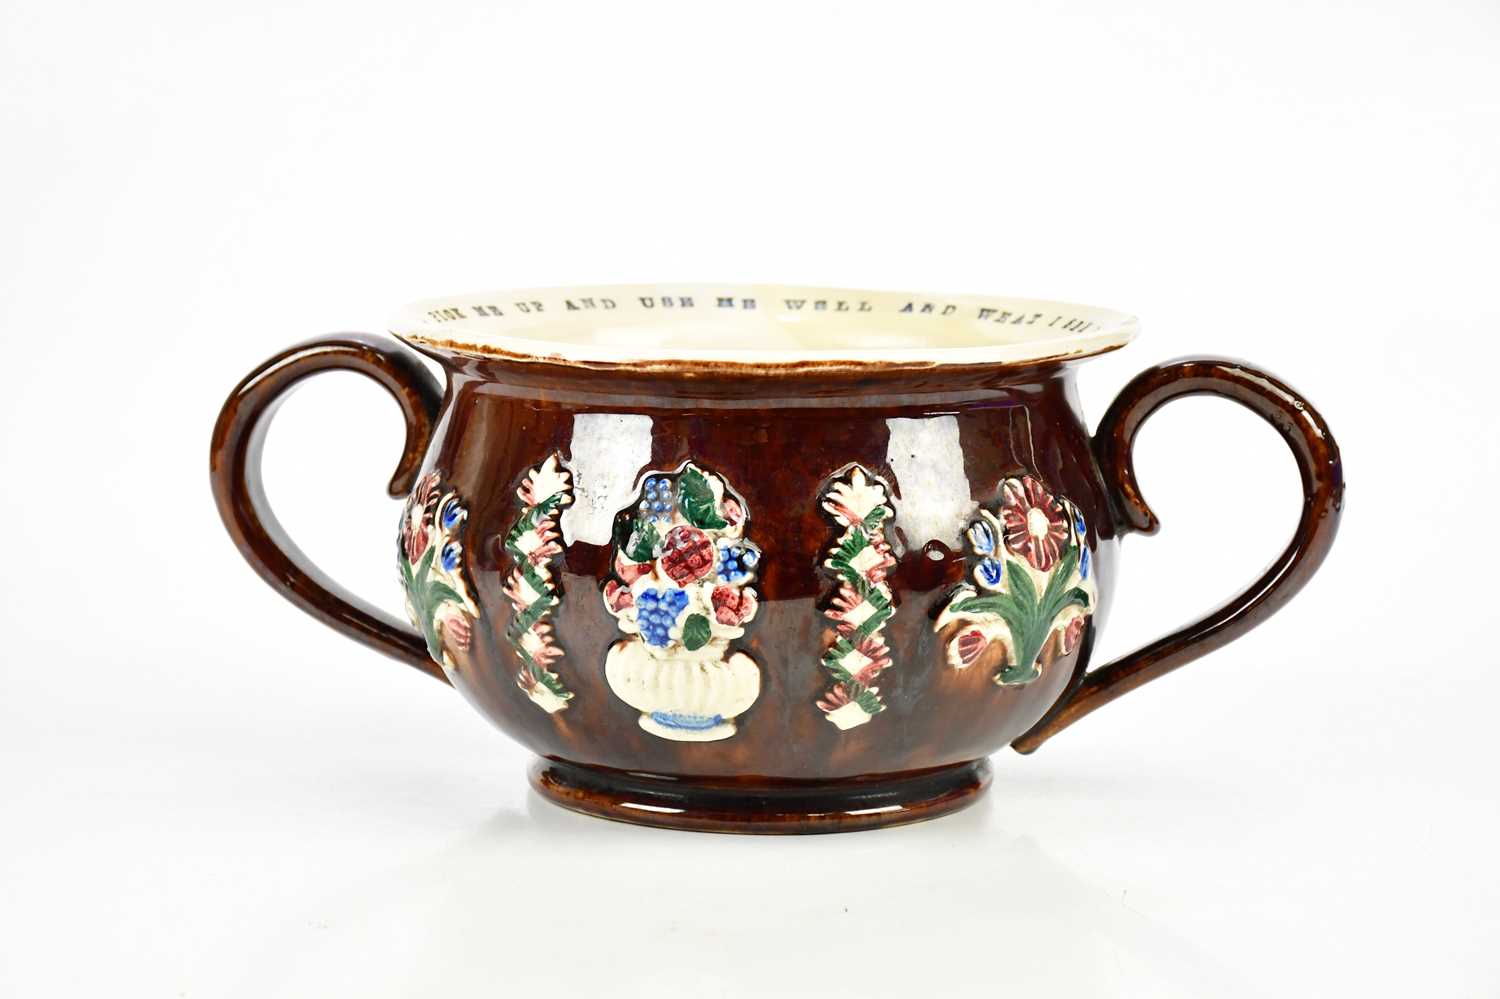 BARGEWARE; a chamber pot, inscribed 'Pick me up, use me well and what I see I will not tell, Jonas